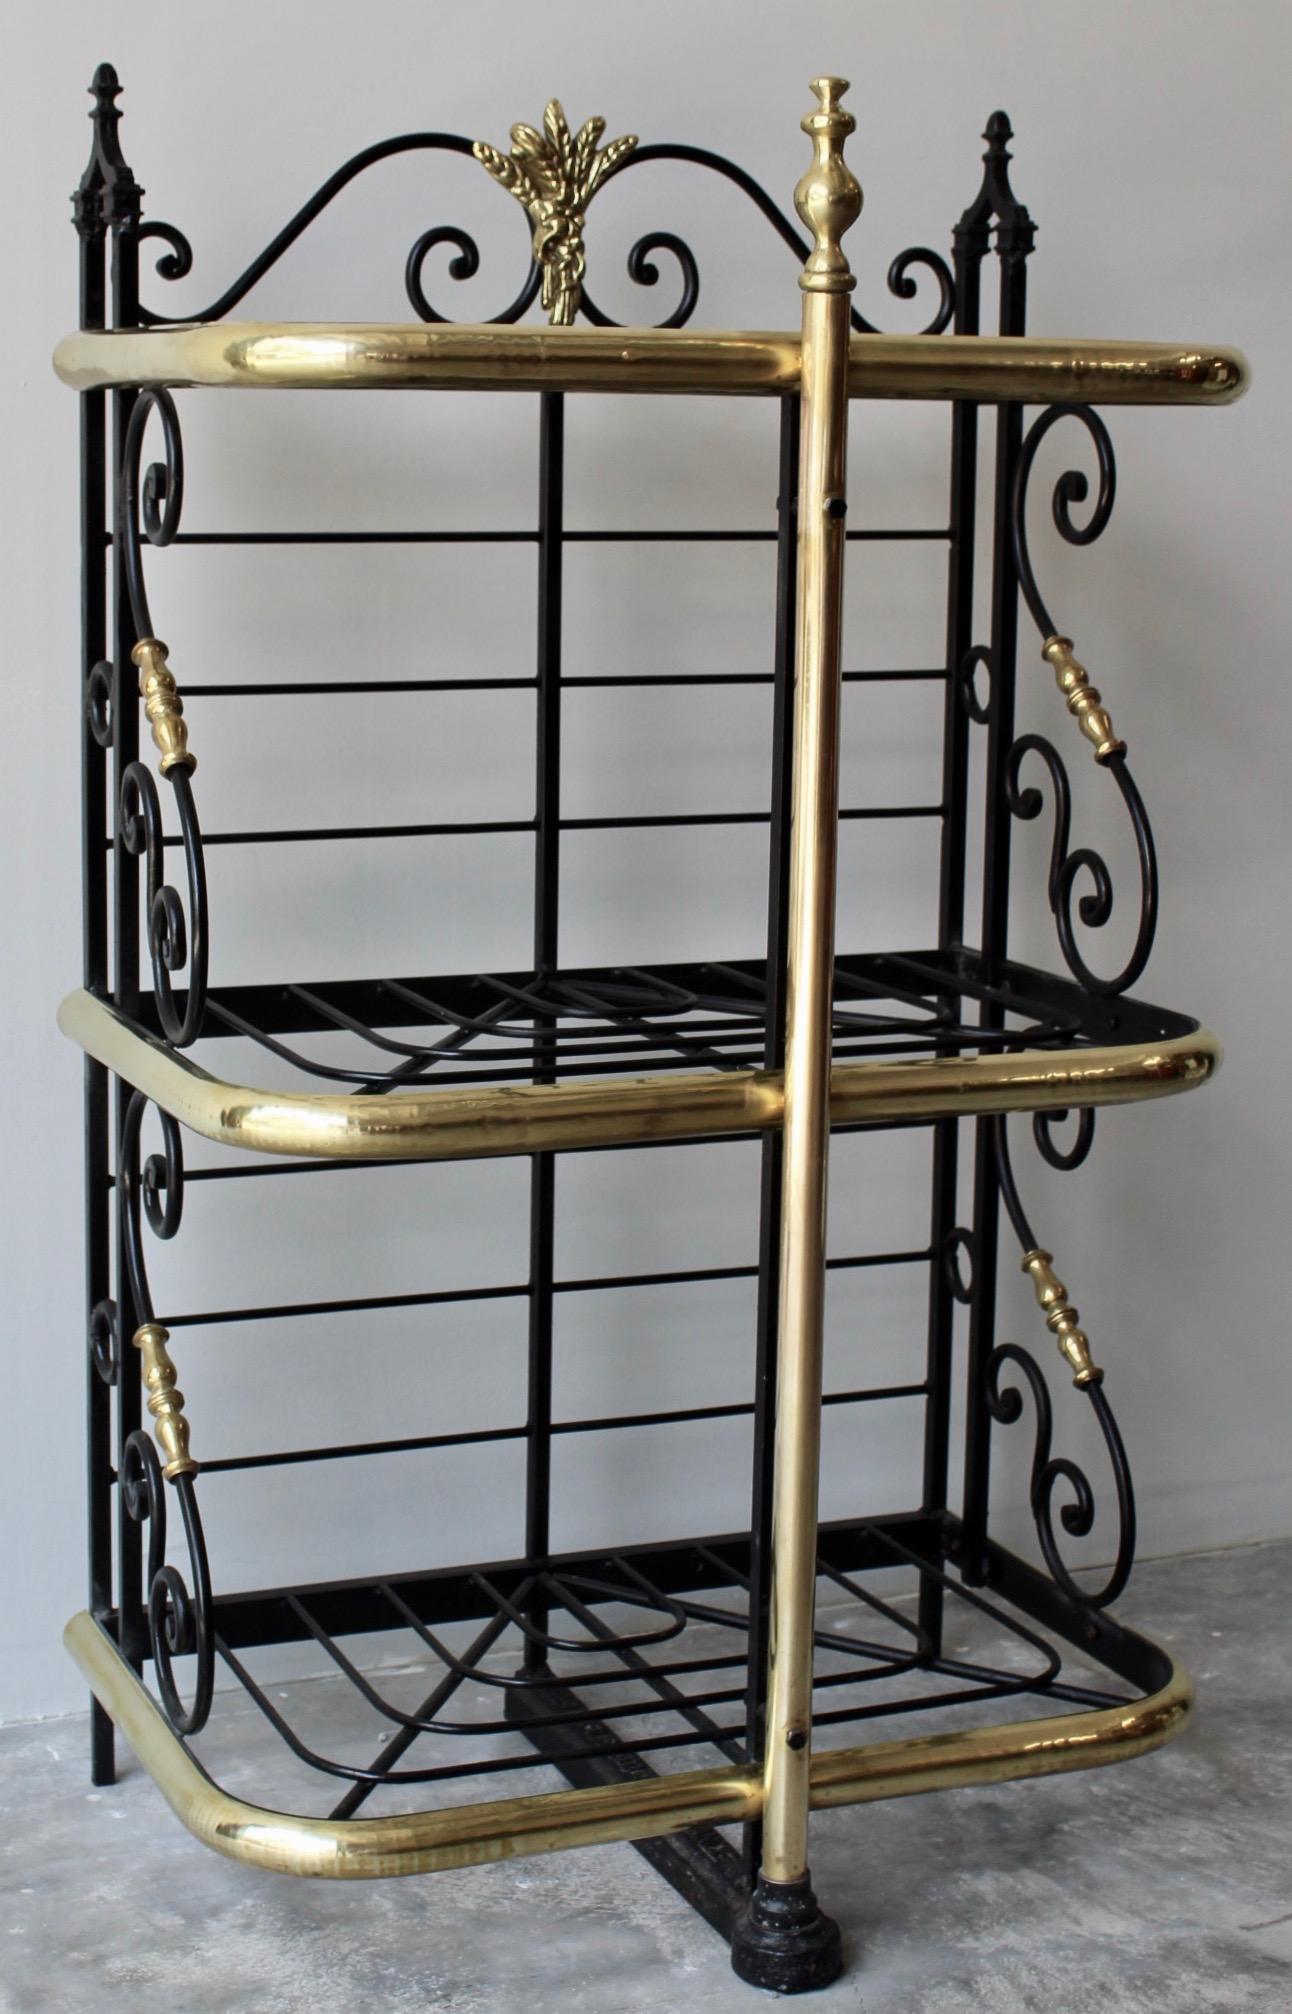 Iron and brass French table or counter top bakers rack. Made in France circa 1890 of the highest quality this Bakers Rack is exceptional in its petite size. Originally made for baked goods, this rack could easily and elegantly be used for storage of